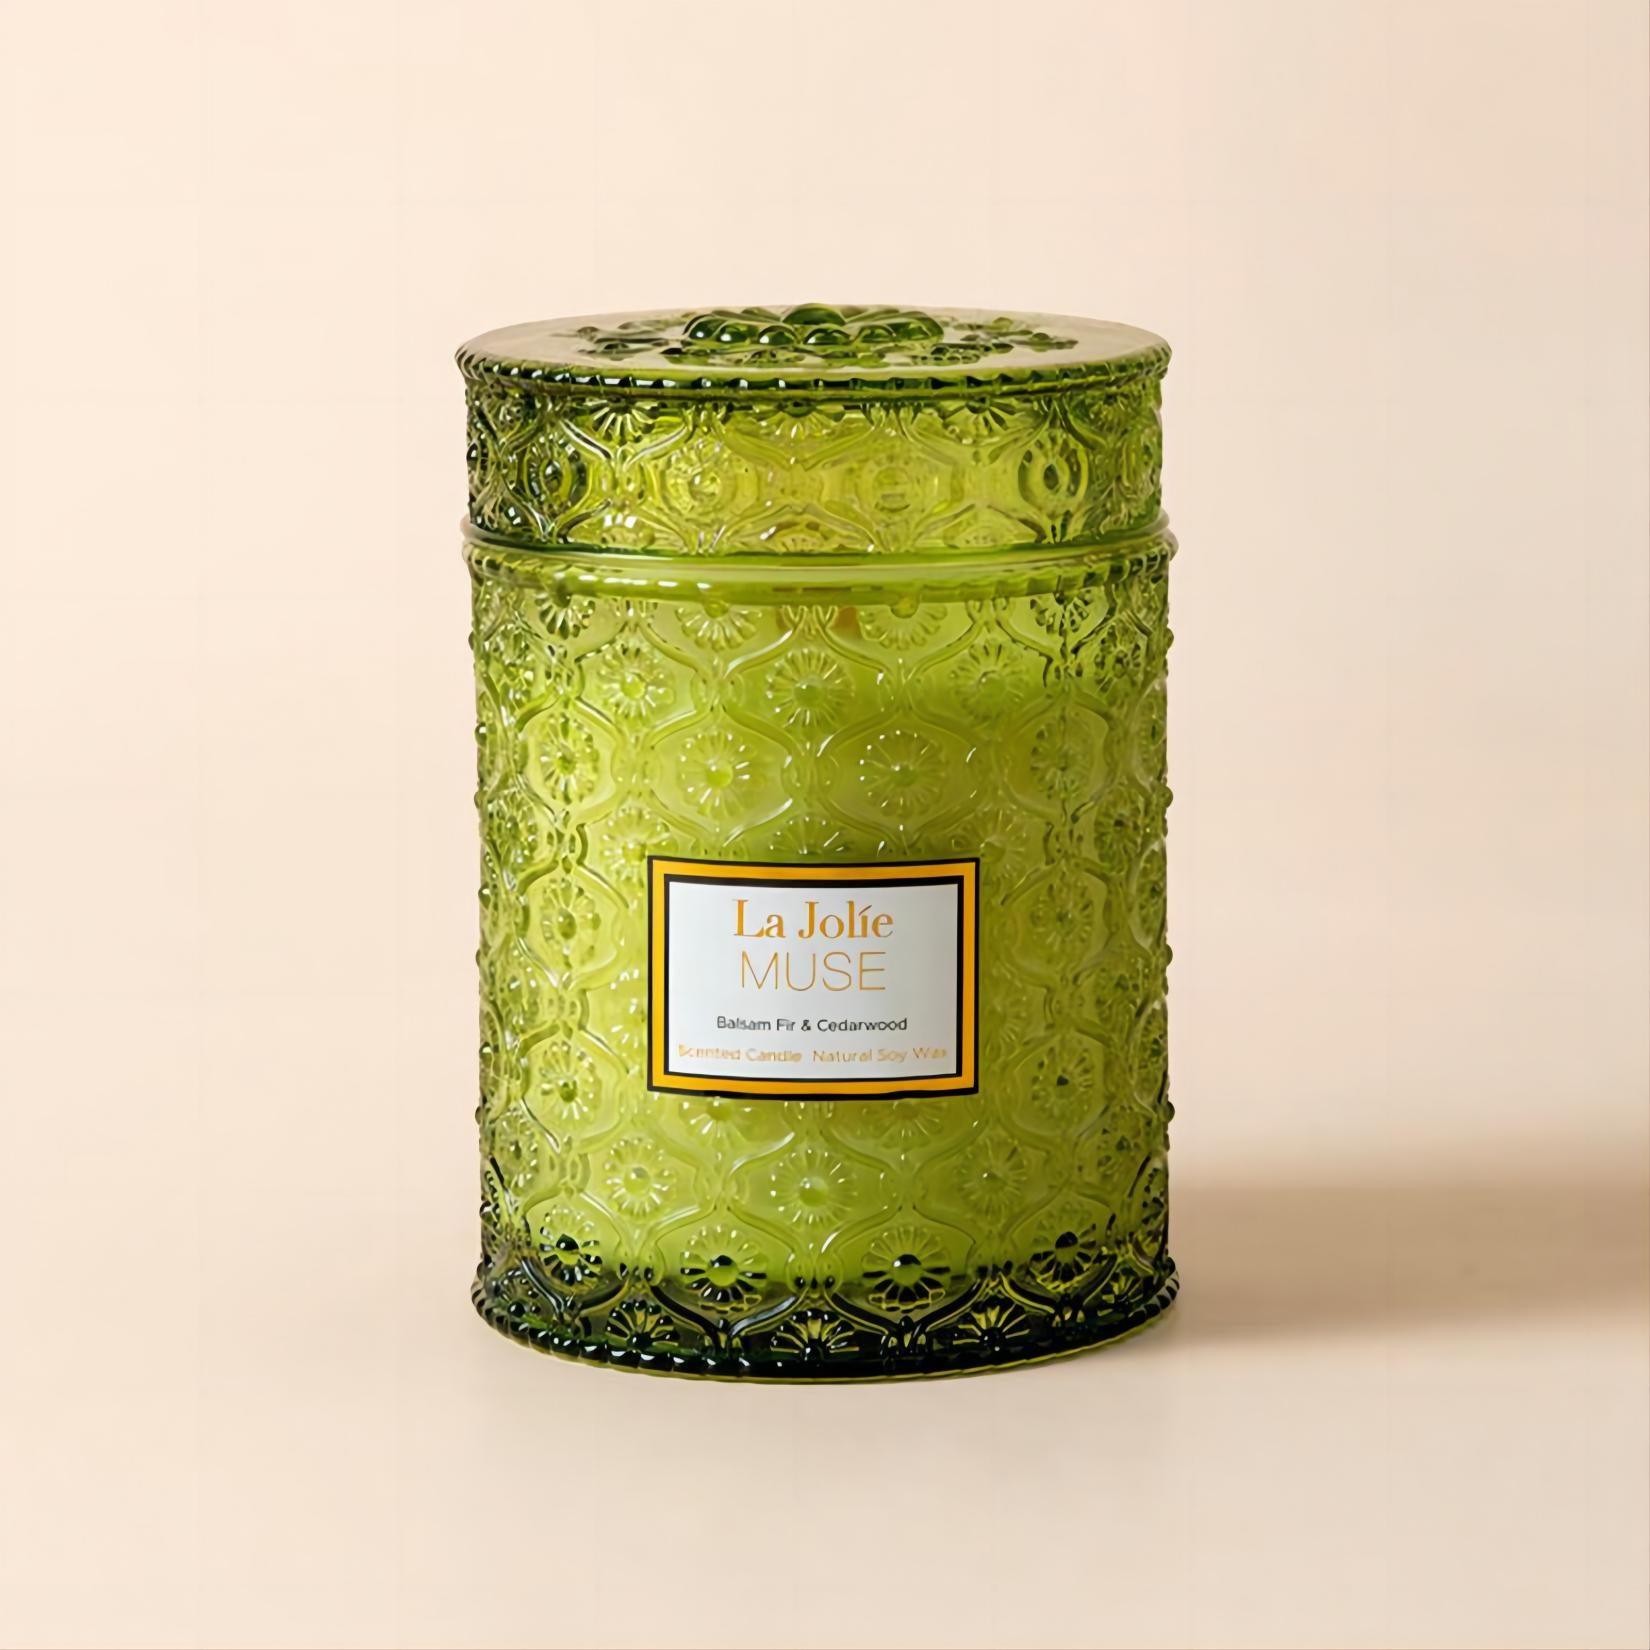 Product Shot of Maelyn - Balsam Fir & Cedarwood 19.4oz candle in the middle